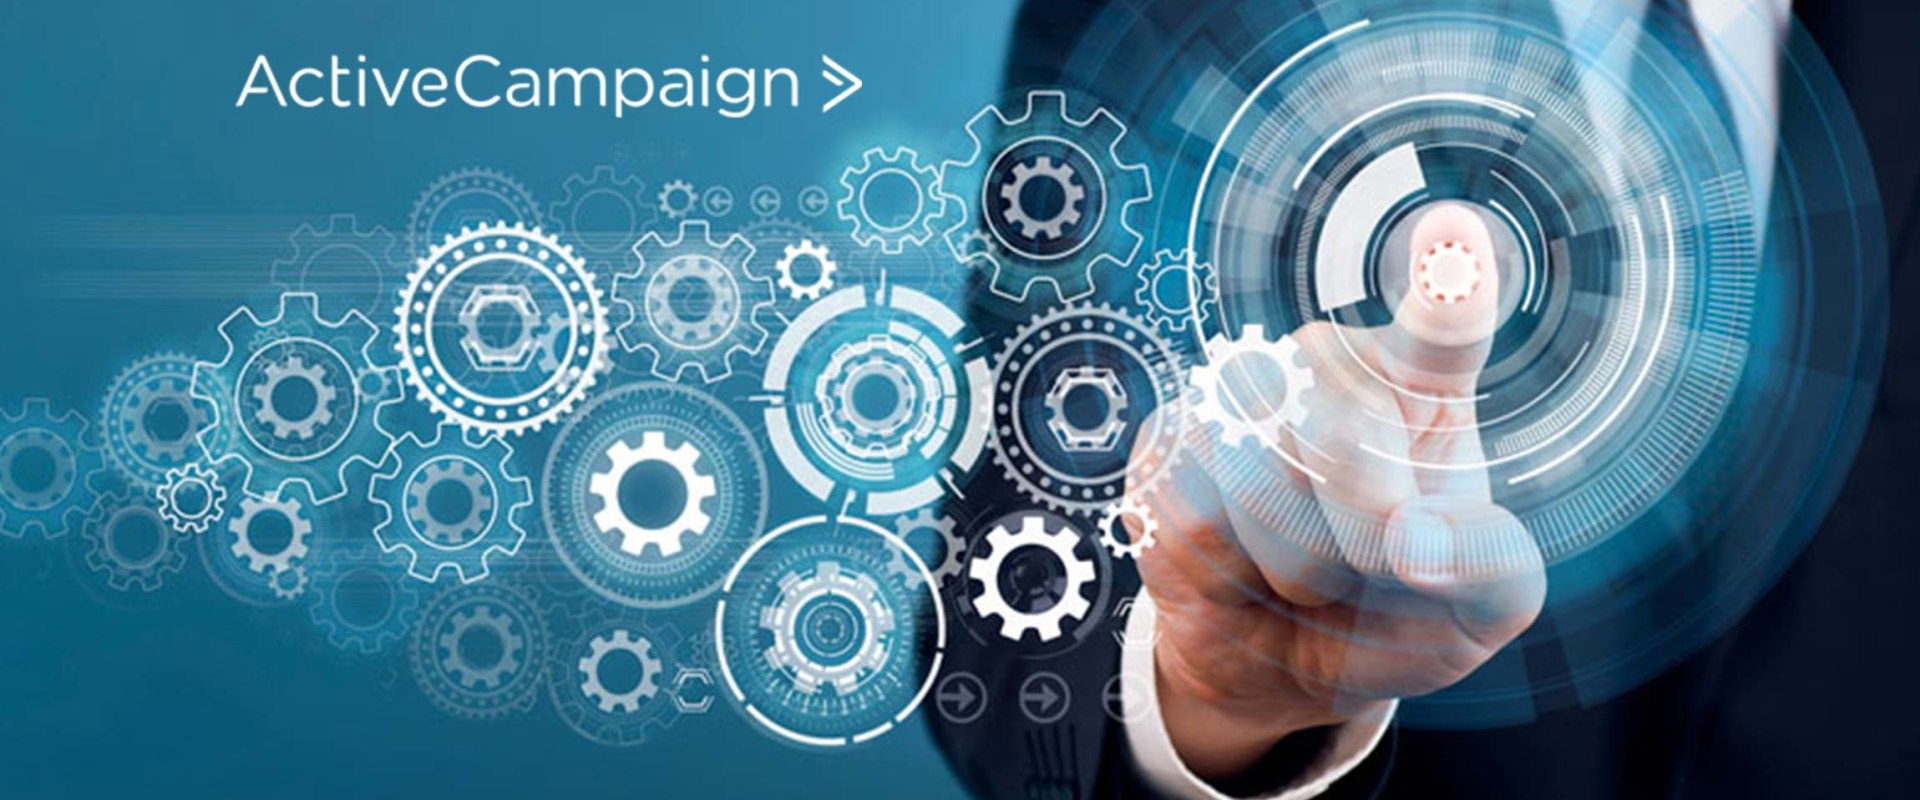 How can i use automation to improve my digital campaigns?